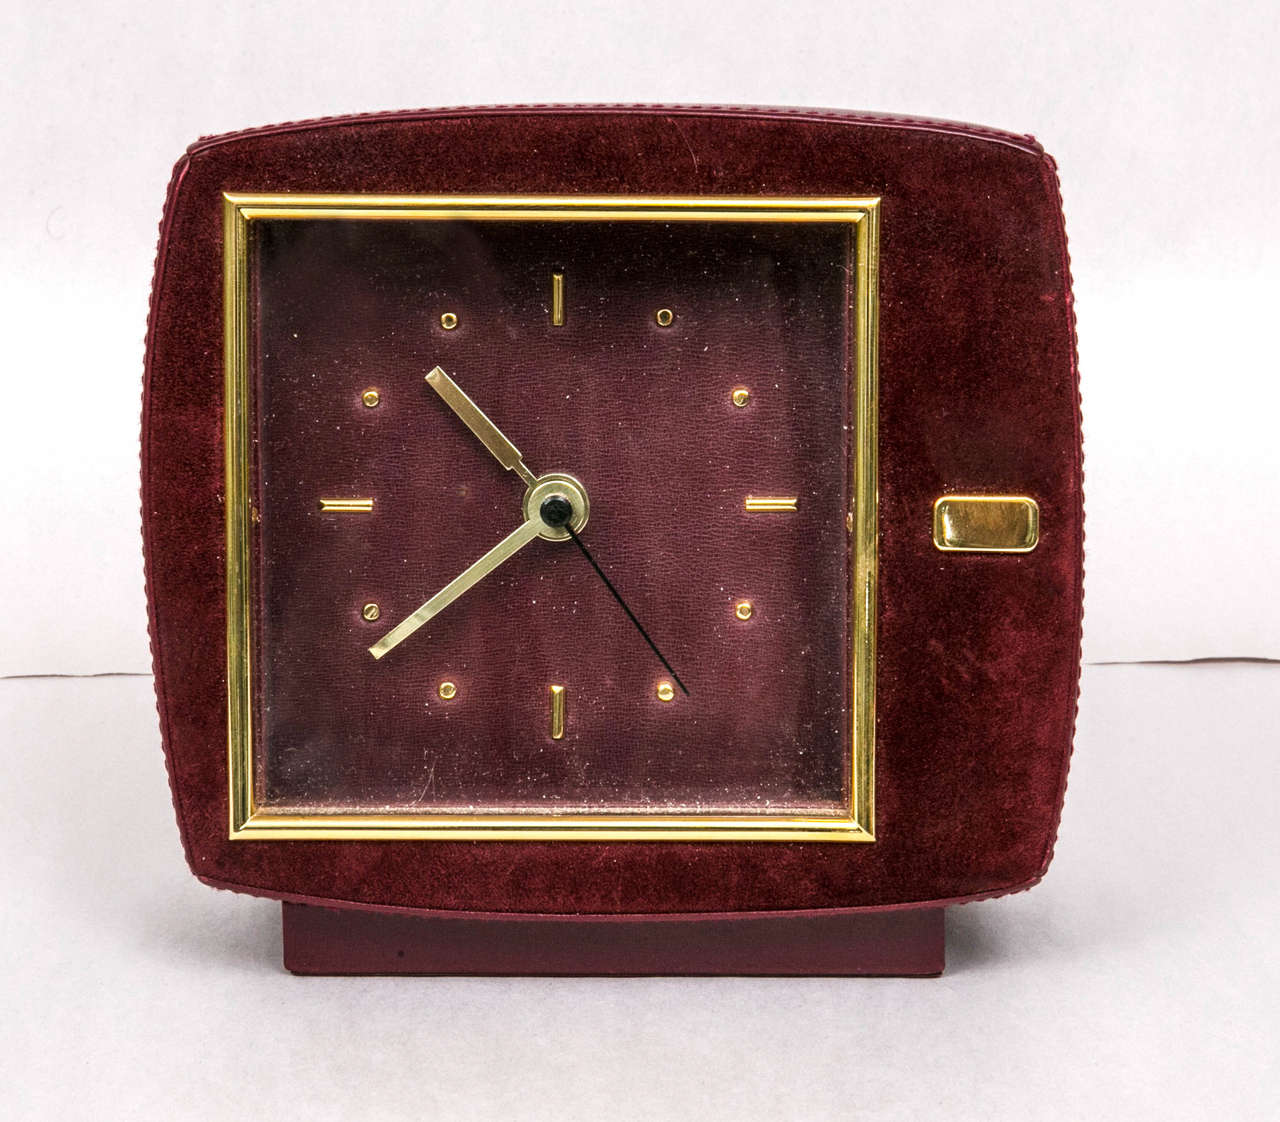 rare mid-century leather and suede clock. opulent burgundy with brass fittings. notable shape and style.